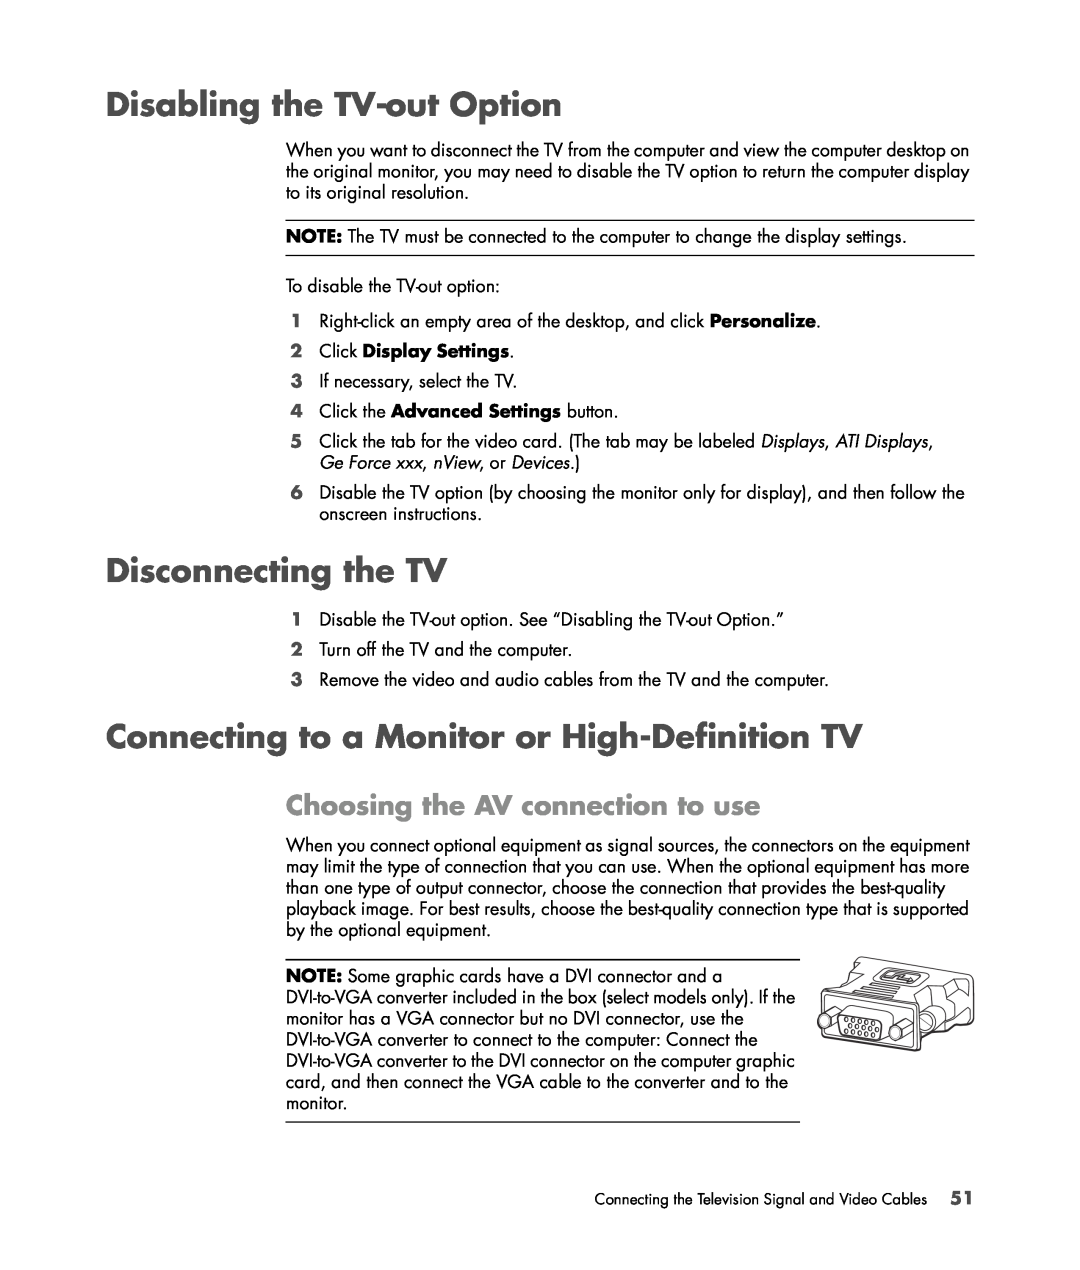 HP SR5448F, SR5558D manual Disabling the TV-out Option, Disconnecting the TV, Connecting to a Monitor or High-Definition TV 